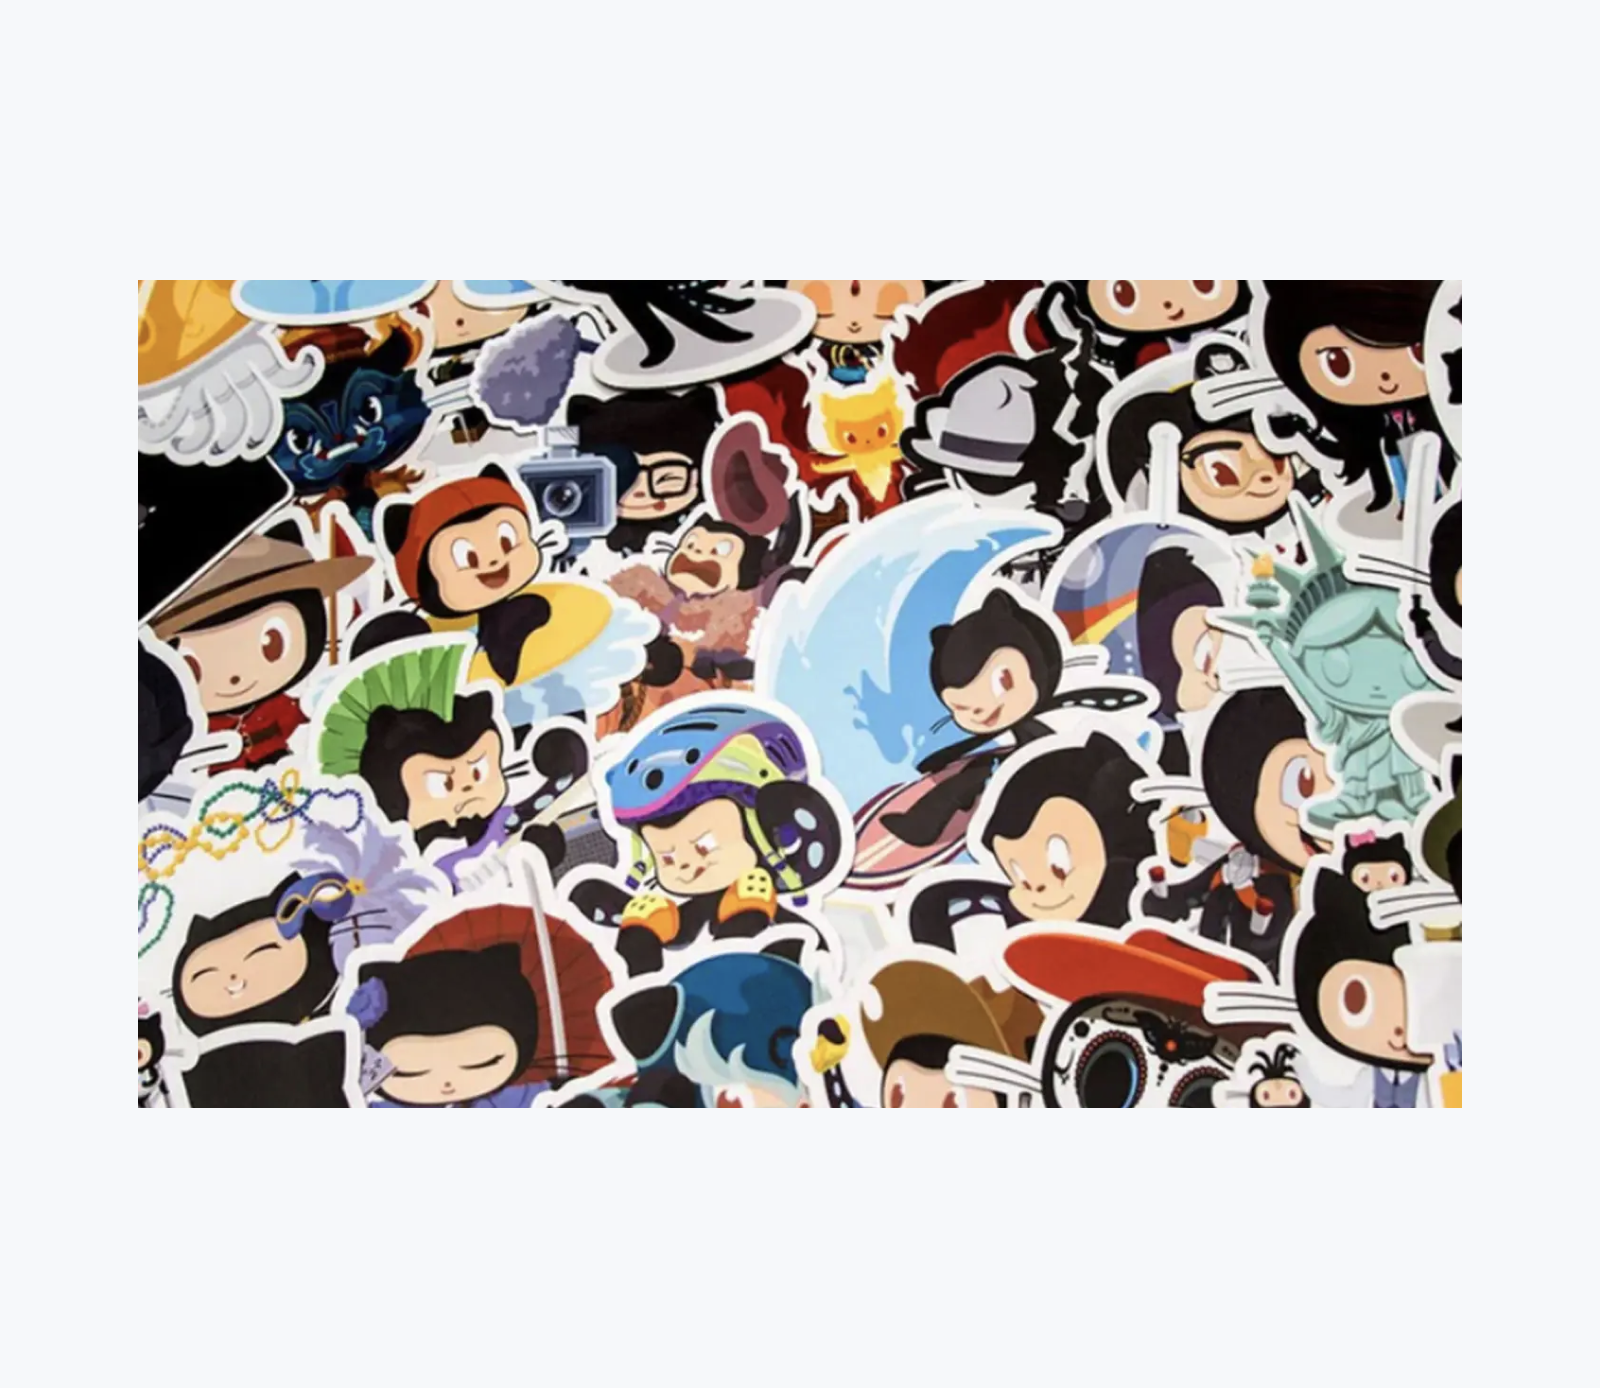 A chaotic pile of GitHub stickers